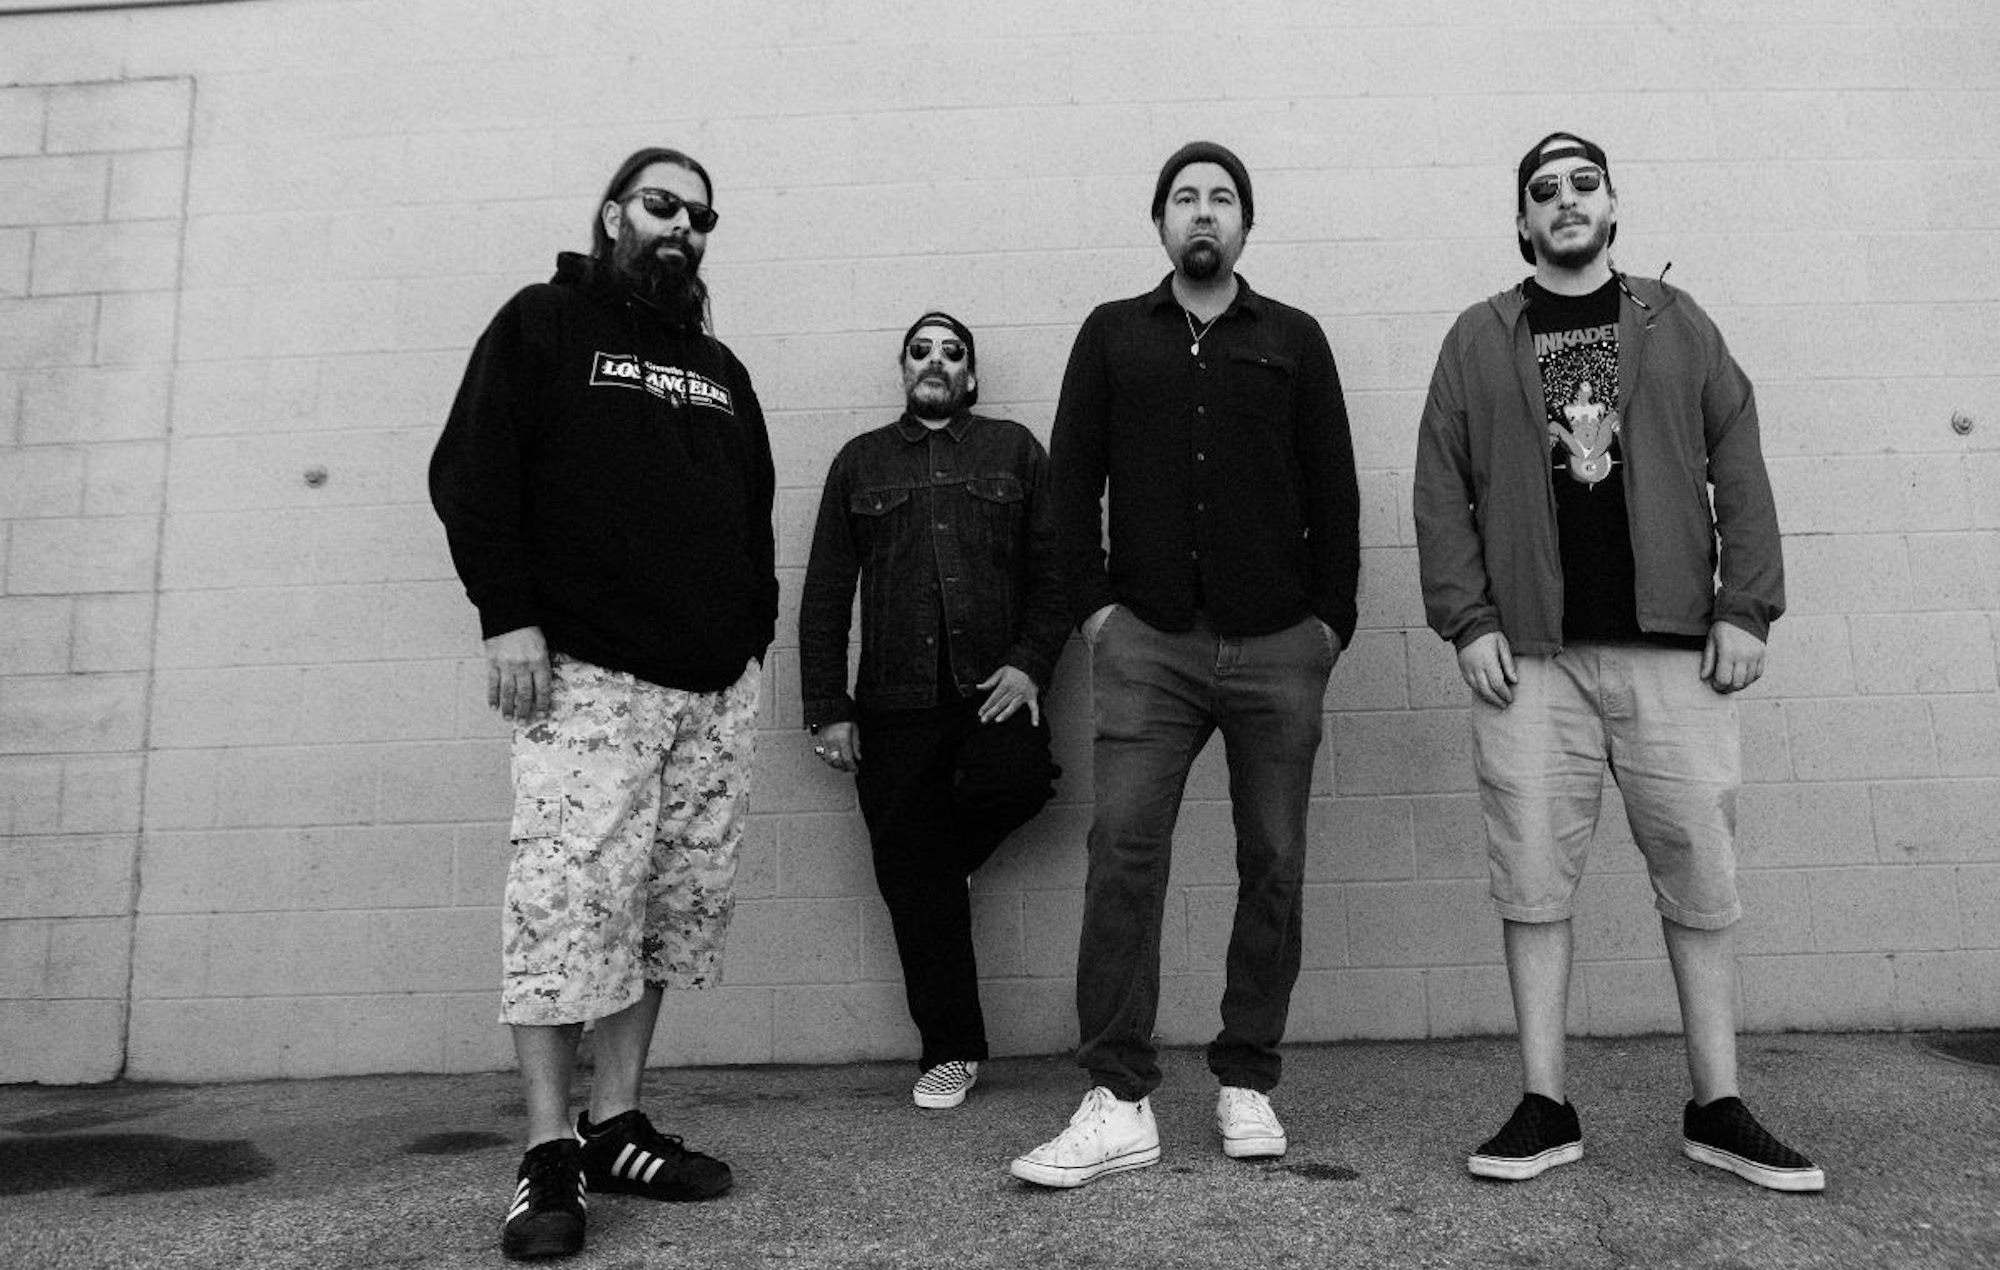 Deftones on new material: “There’s always a little something brewing”